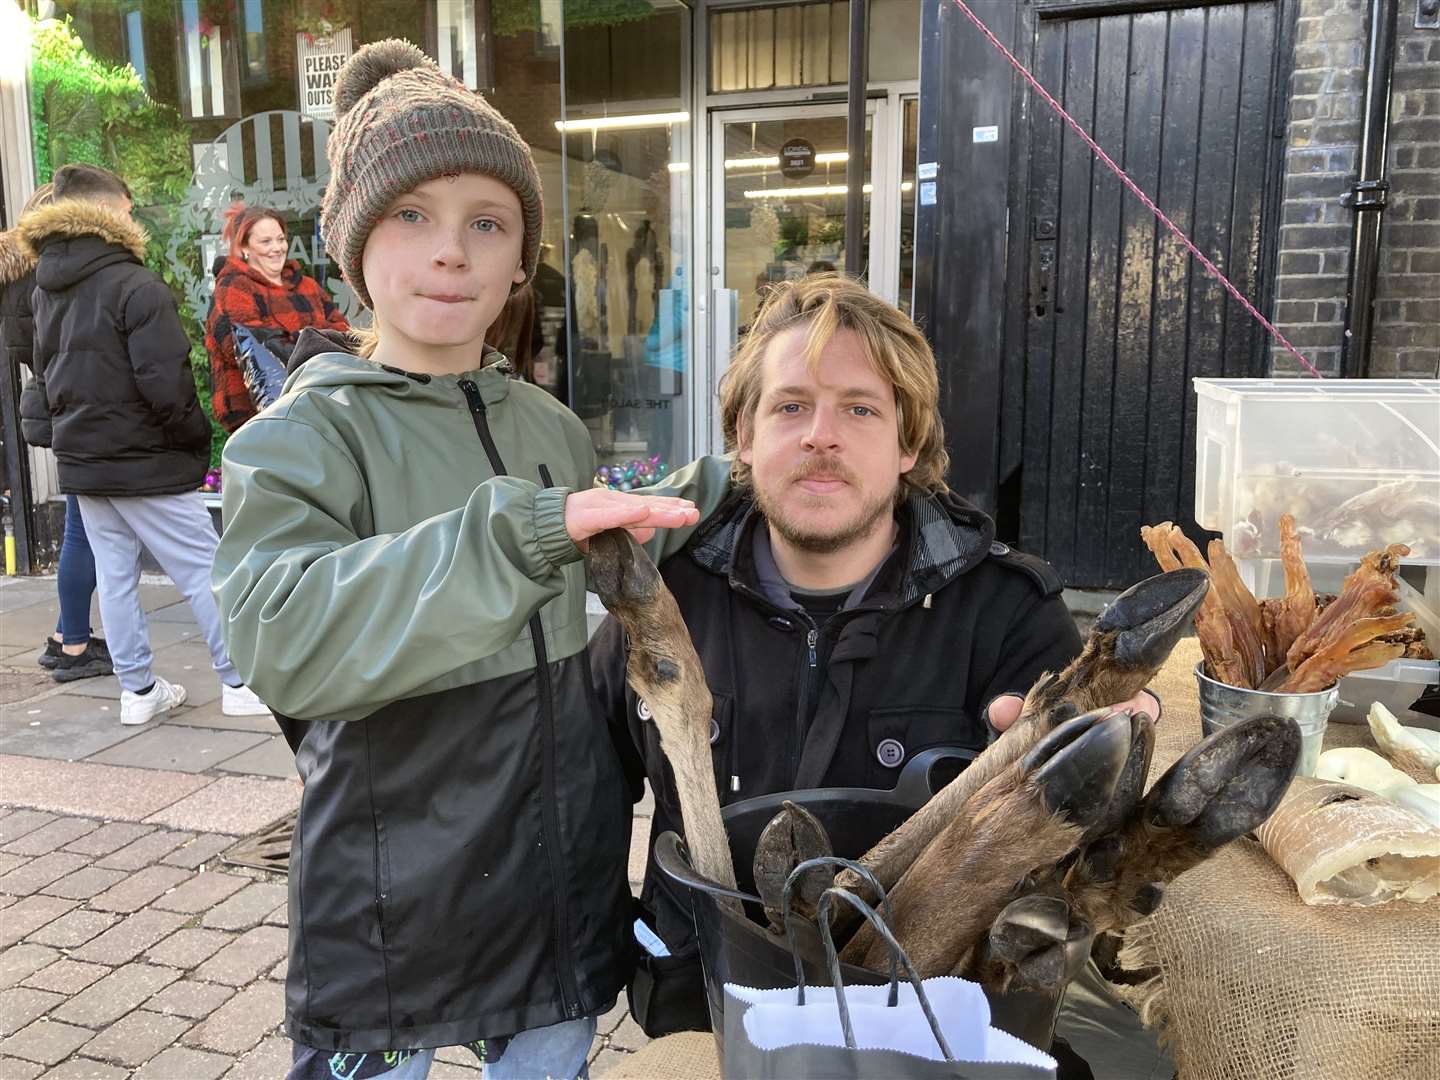 Islander Jake O'Keeffe and his son Oscar, 9, did a roaring trade selling 'reindeer legs' and pig snouts on their natural dog treat stall in Sheerness